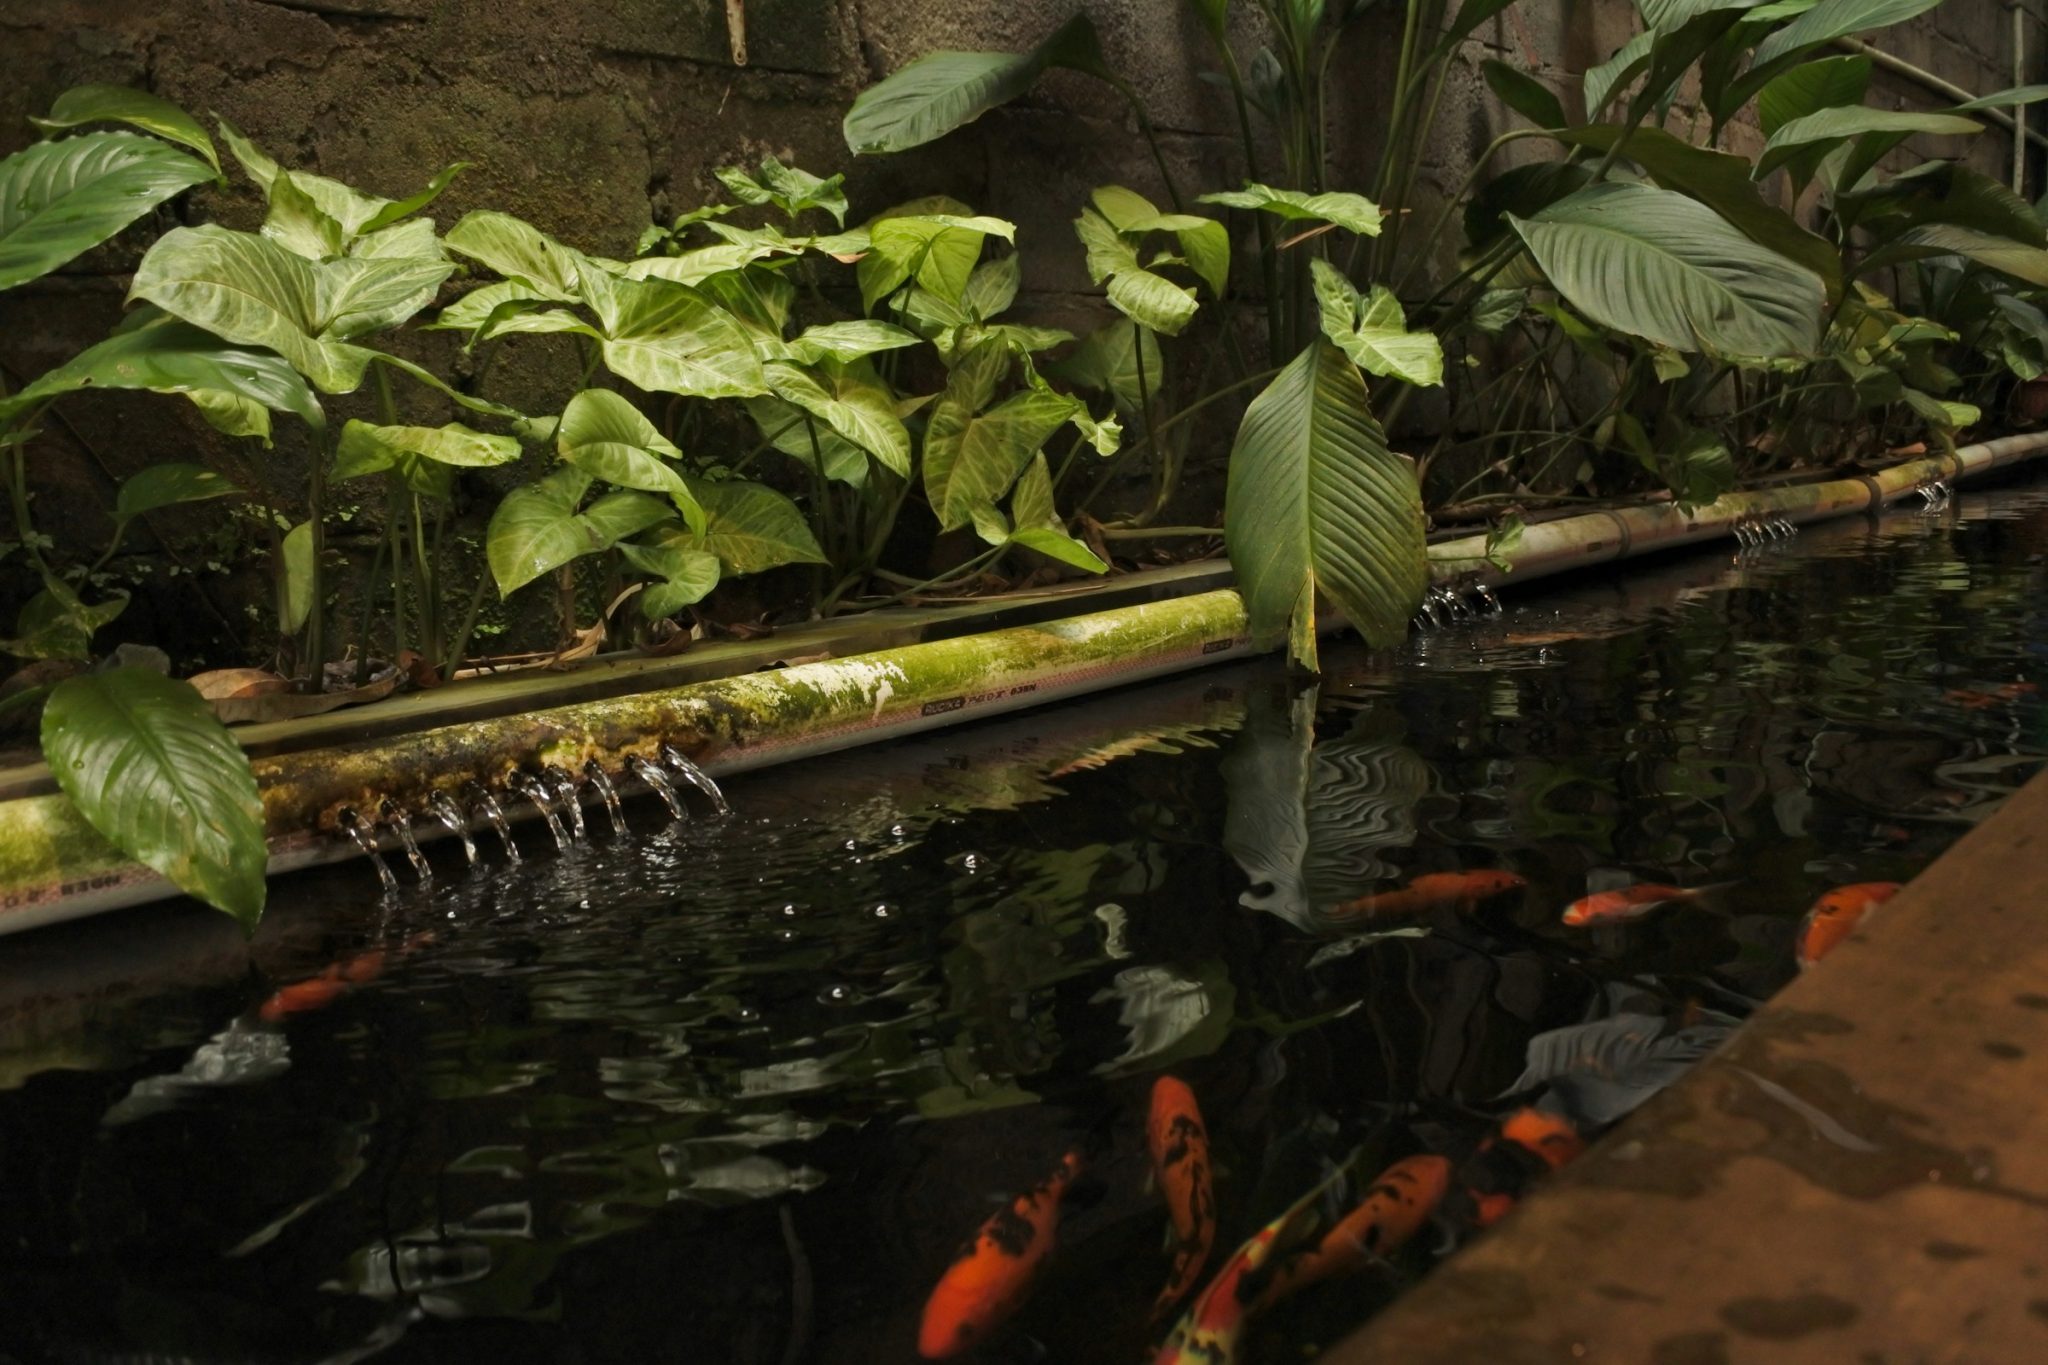 What to feed your pond fish: a complete guide